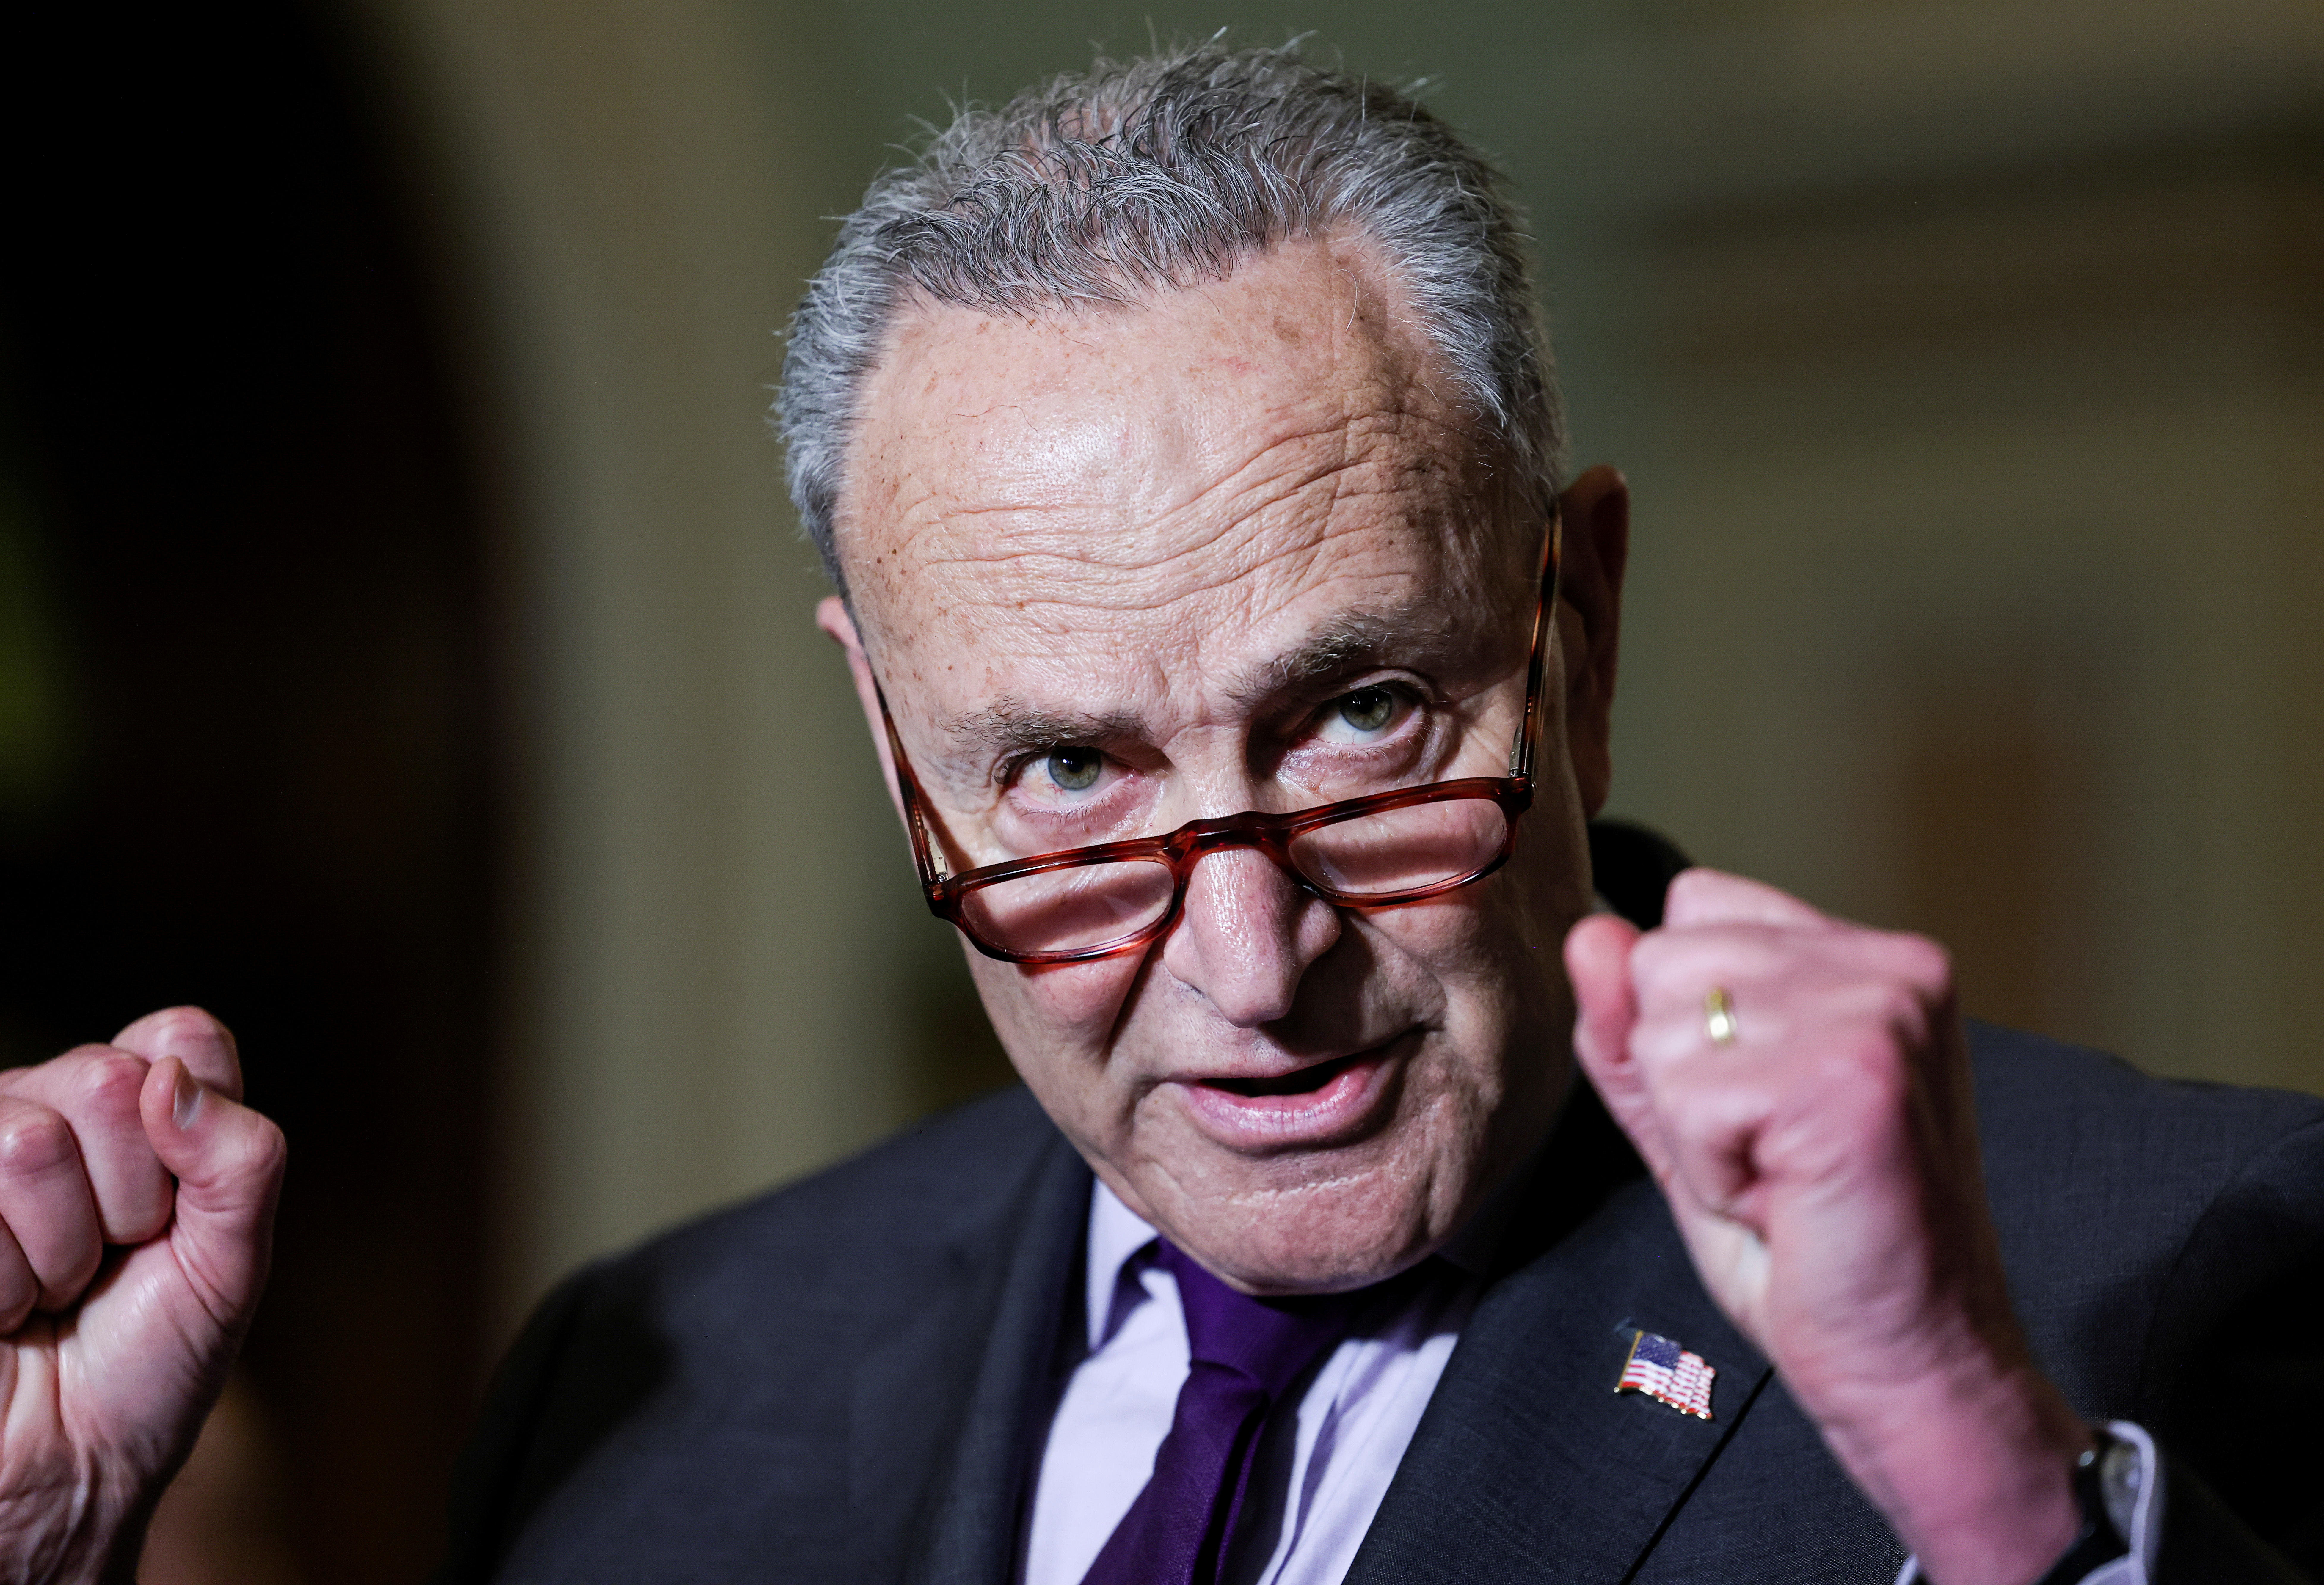 U.S. Senate Majority Leader Chuck Schumer (D-NY) talks to reporters following the Senate Democrats weekly policy lunch at the U.S. Capitol in Washington, U.S., June 15, 2021. REUTERS/Evelyn Hockstein/File Photo